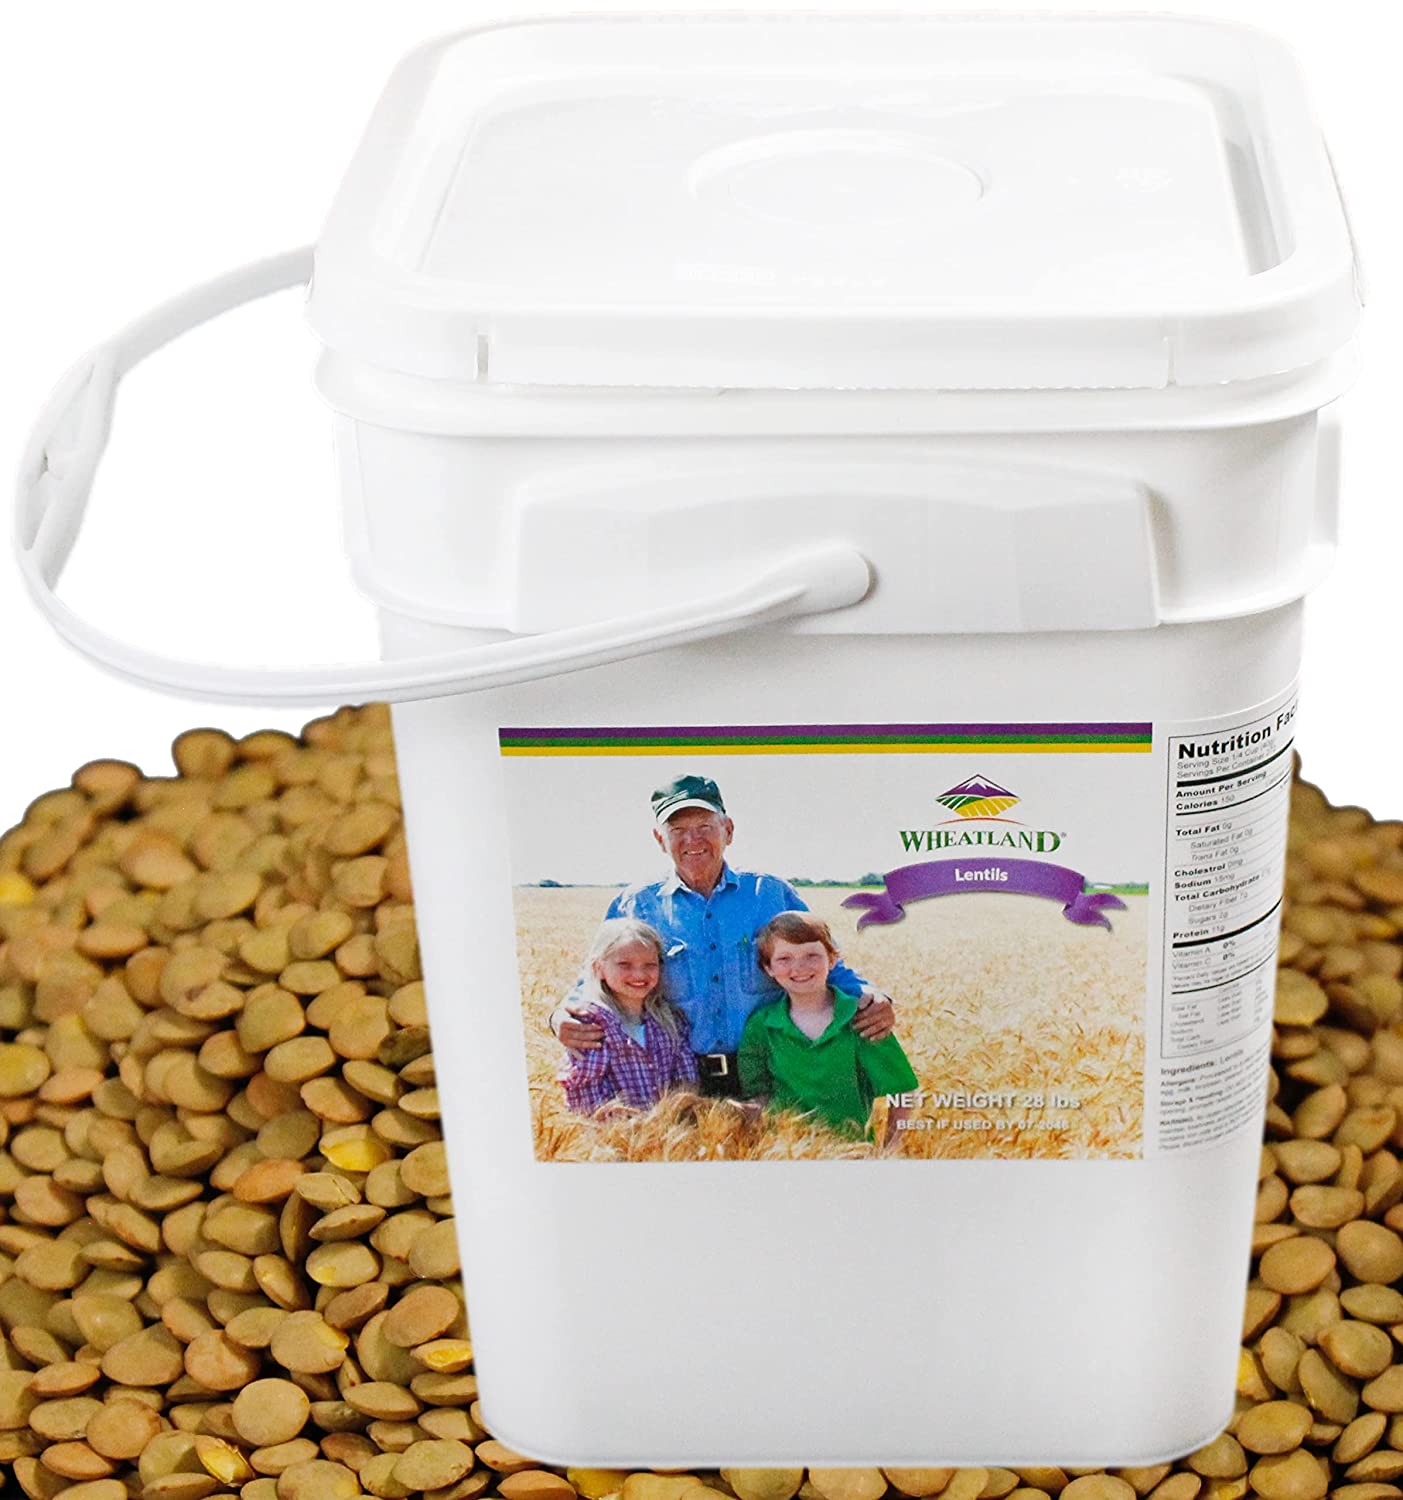 Wheatland™ Lentils • 20lb • Mylar and Bucket Provide 25 Year Shelf Life • Emergency Food Storage • Lab Tested ISO 17025 Verified Chemical-Free • Never Irradiated, no Desiccants and non GMO • High Trust Seller • 40 Year Legacy of Prepping